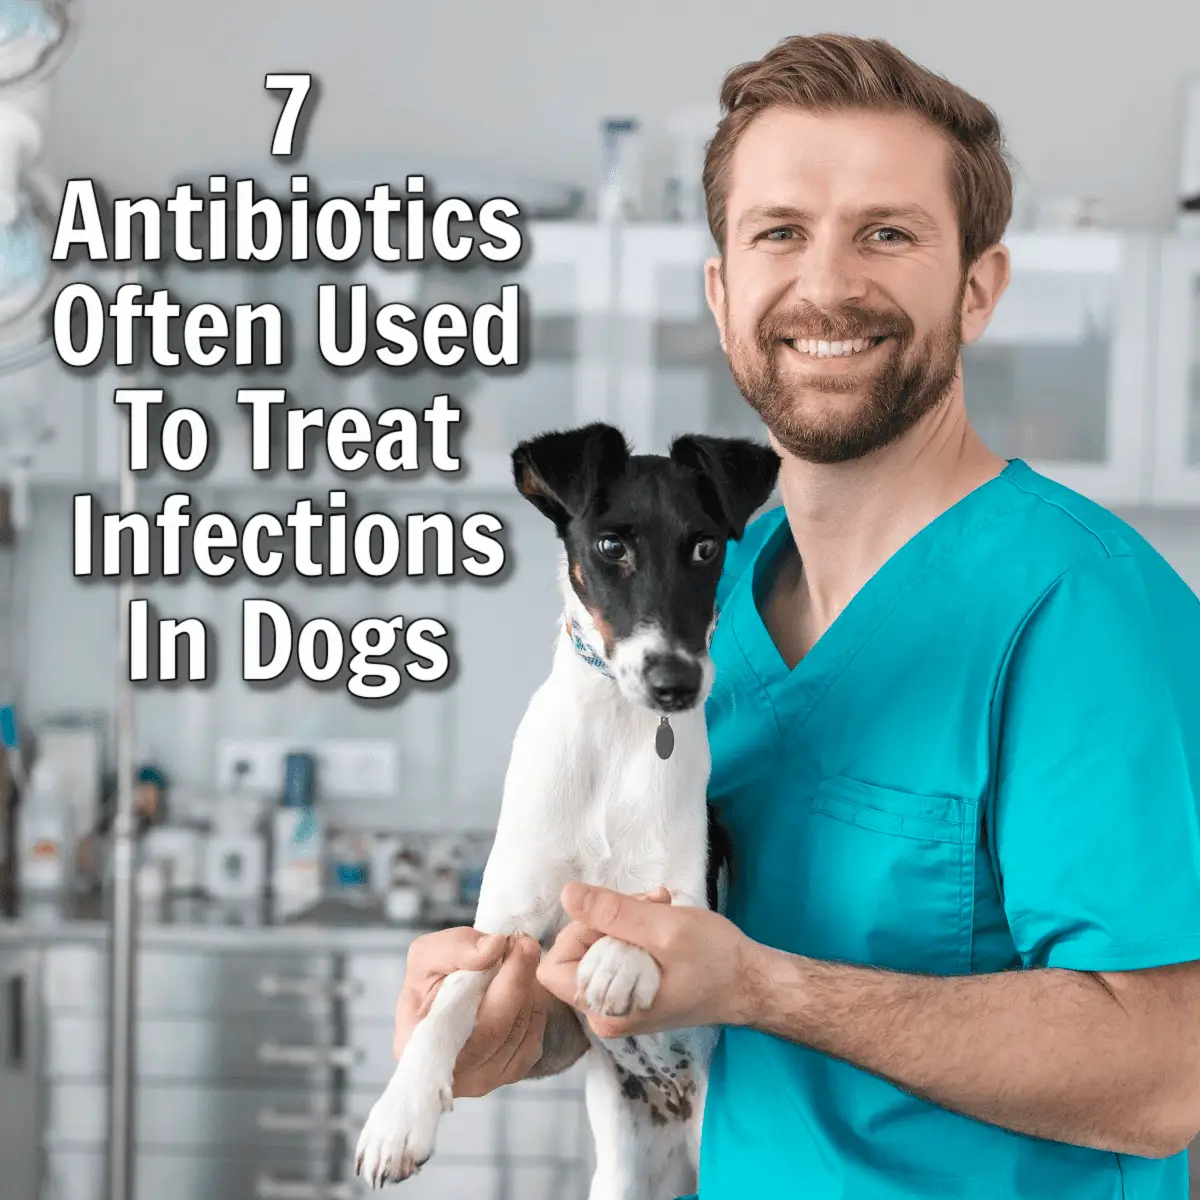 7 Antibiotics Often Used To Treat Infections In Dogs